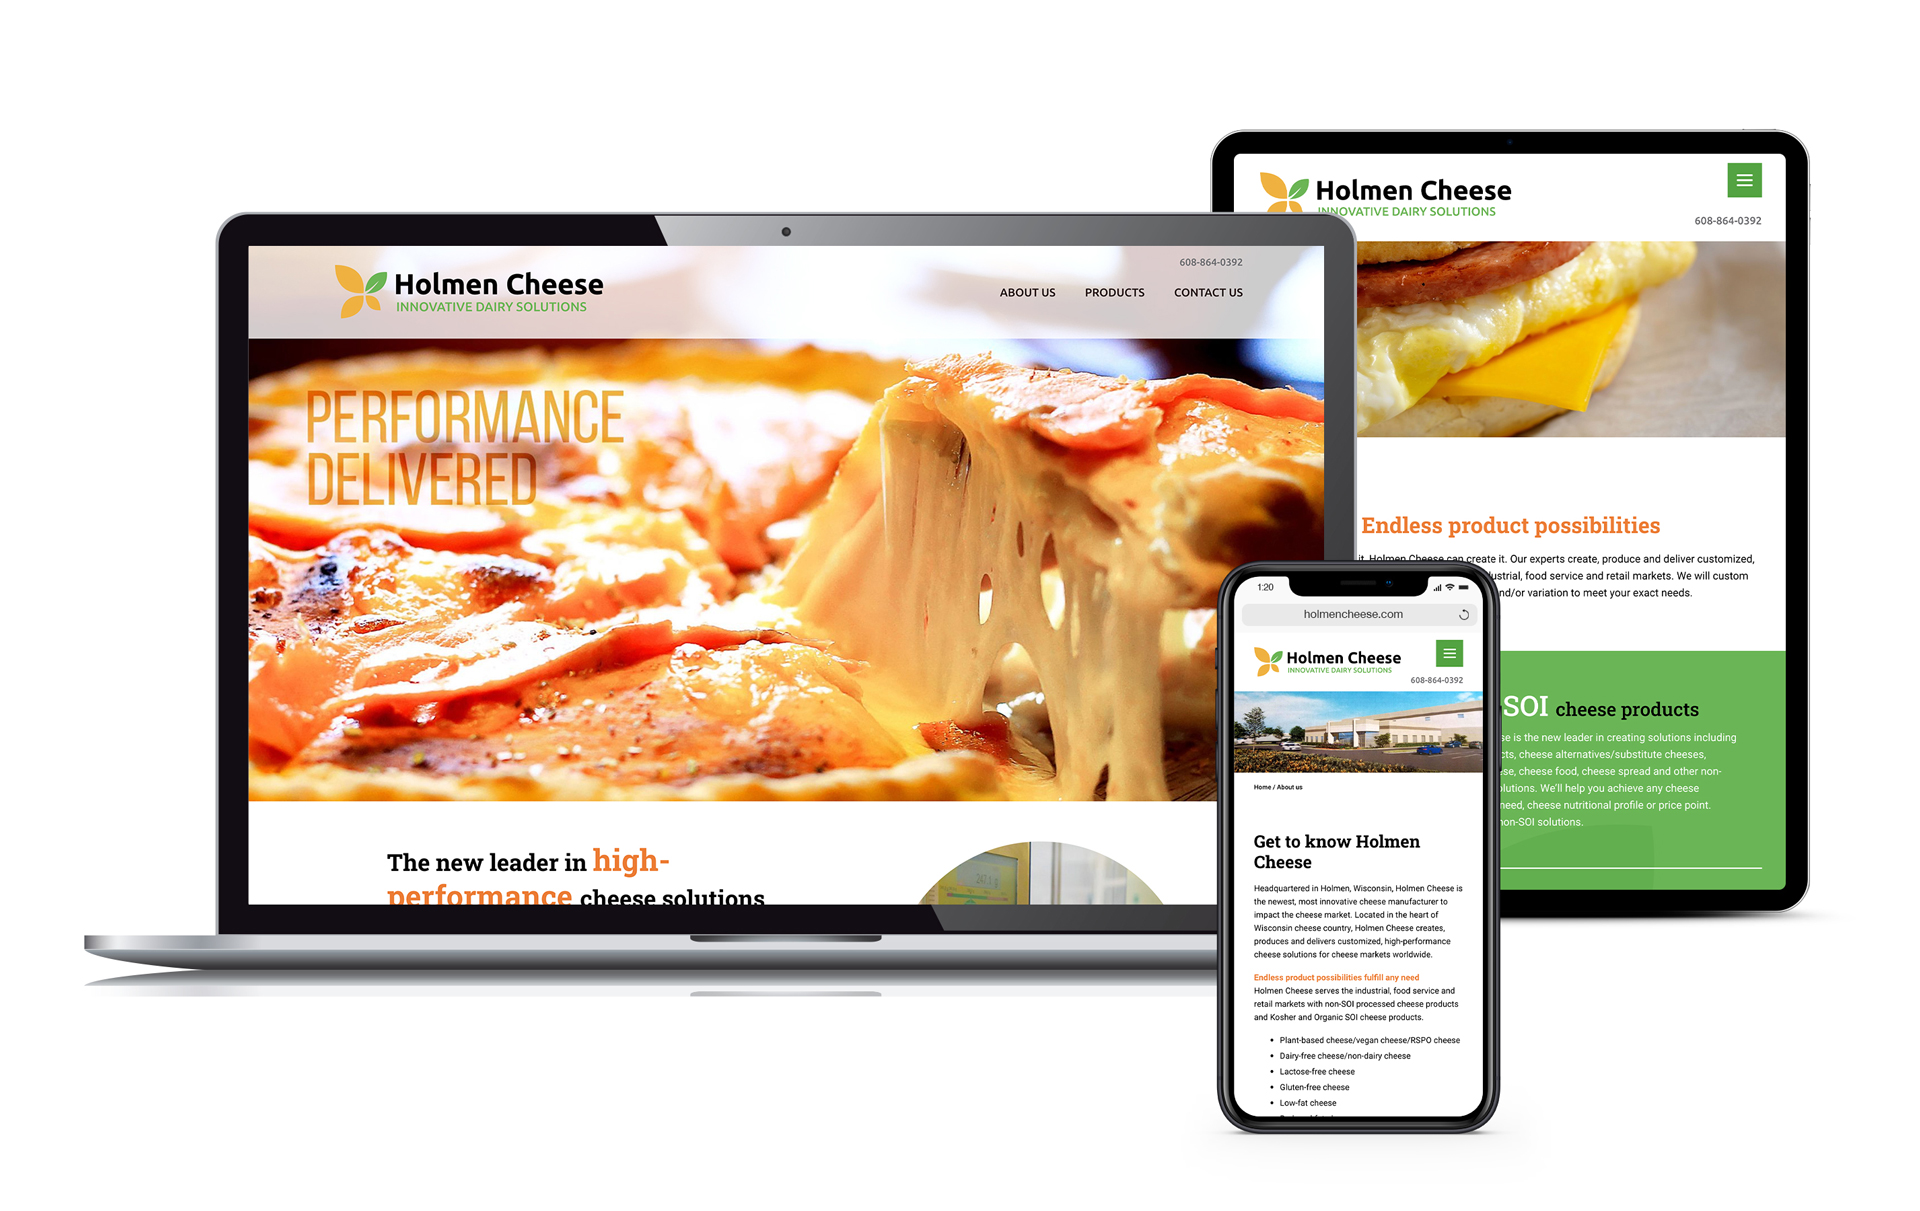 Pages from Holmen Cheese’s WordPress website created by Vendi Advertising and displayed on laptop, tablet and phone screens